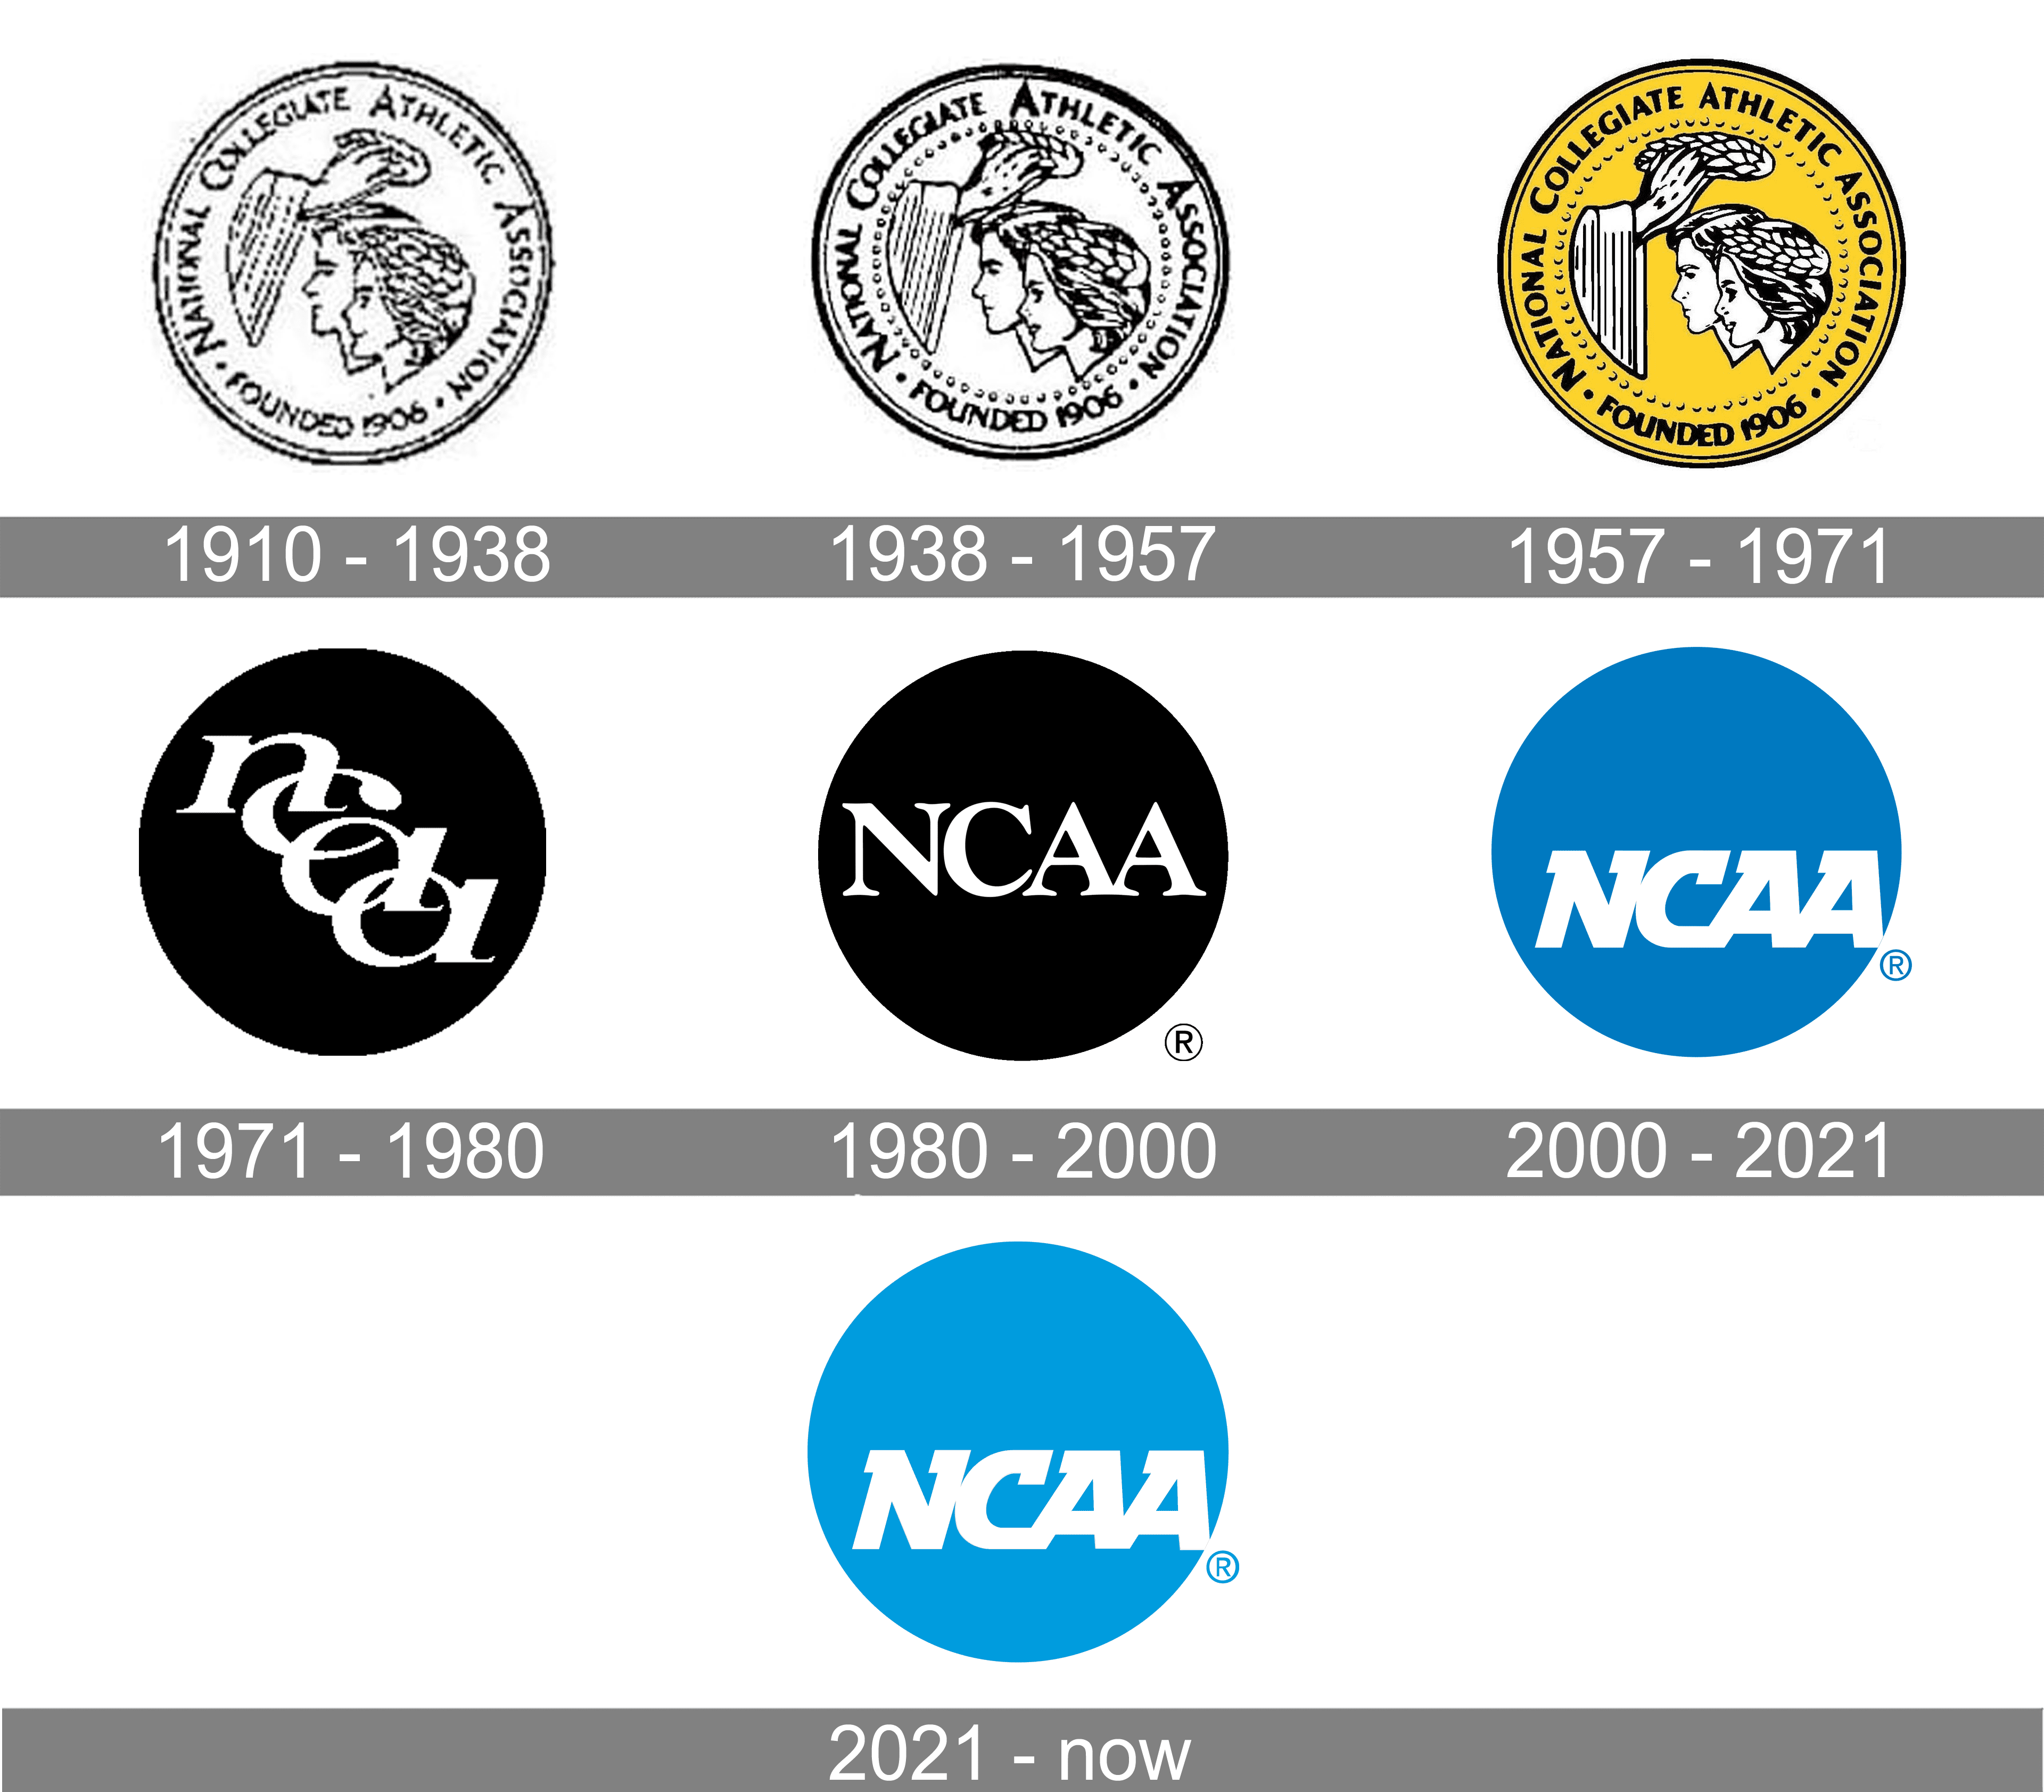 National Collegiate Athletic Association logo and symbol, meaning